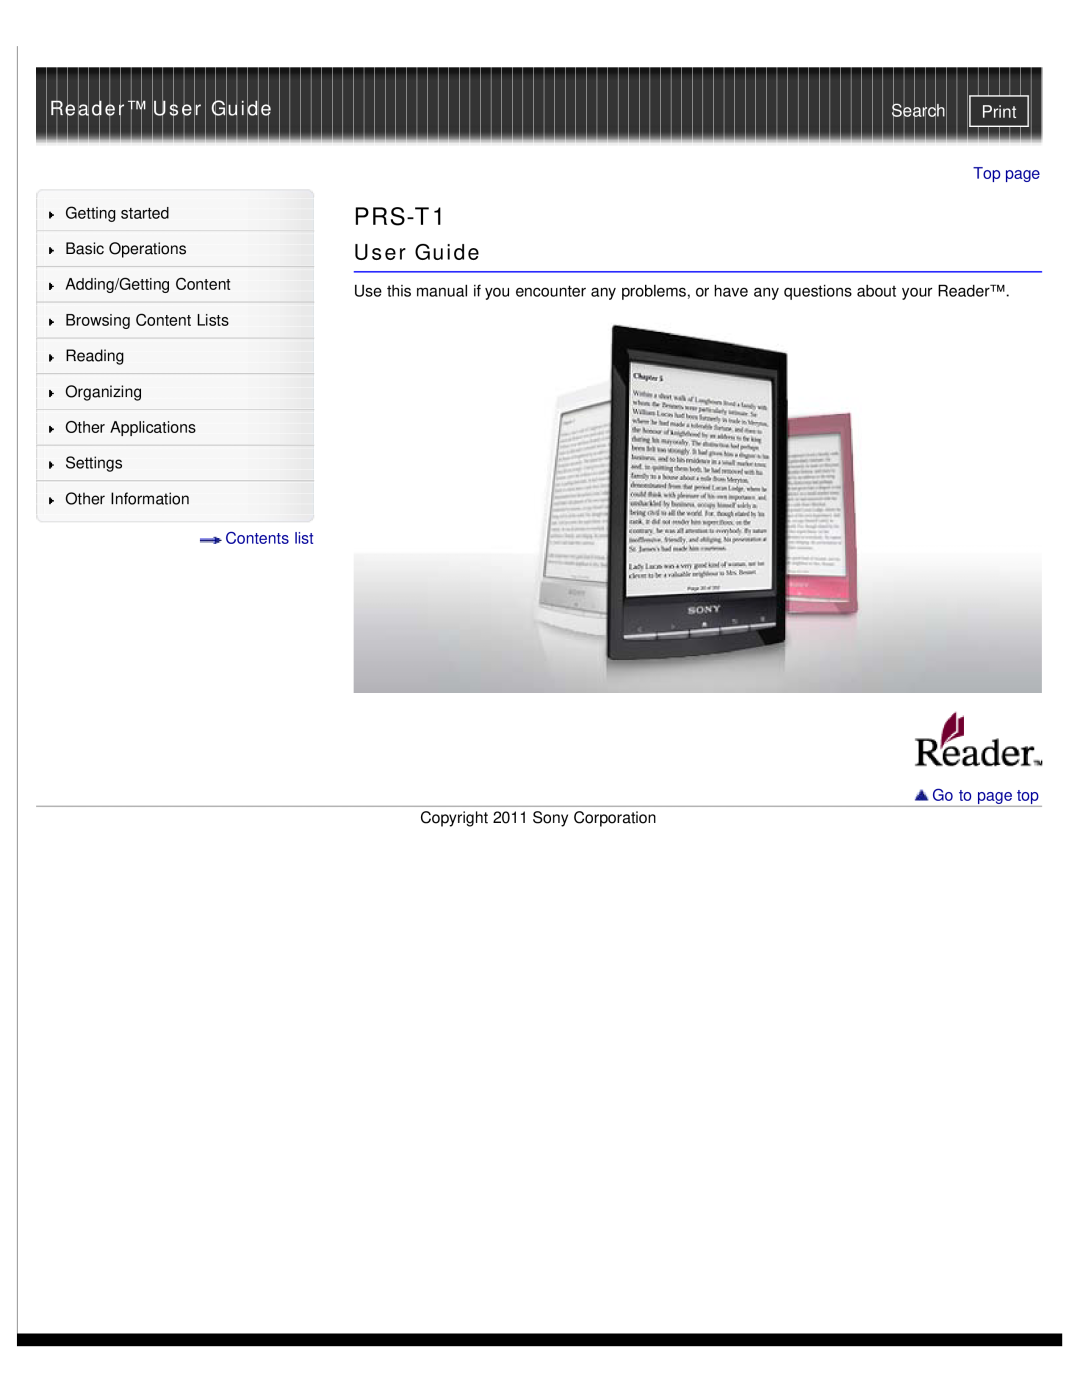 Sony PRS-T1RC, PRS-T1WC manual Reader User Guide, Search, Print, Contents list, Top page, Go to page top 